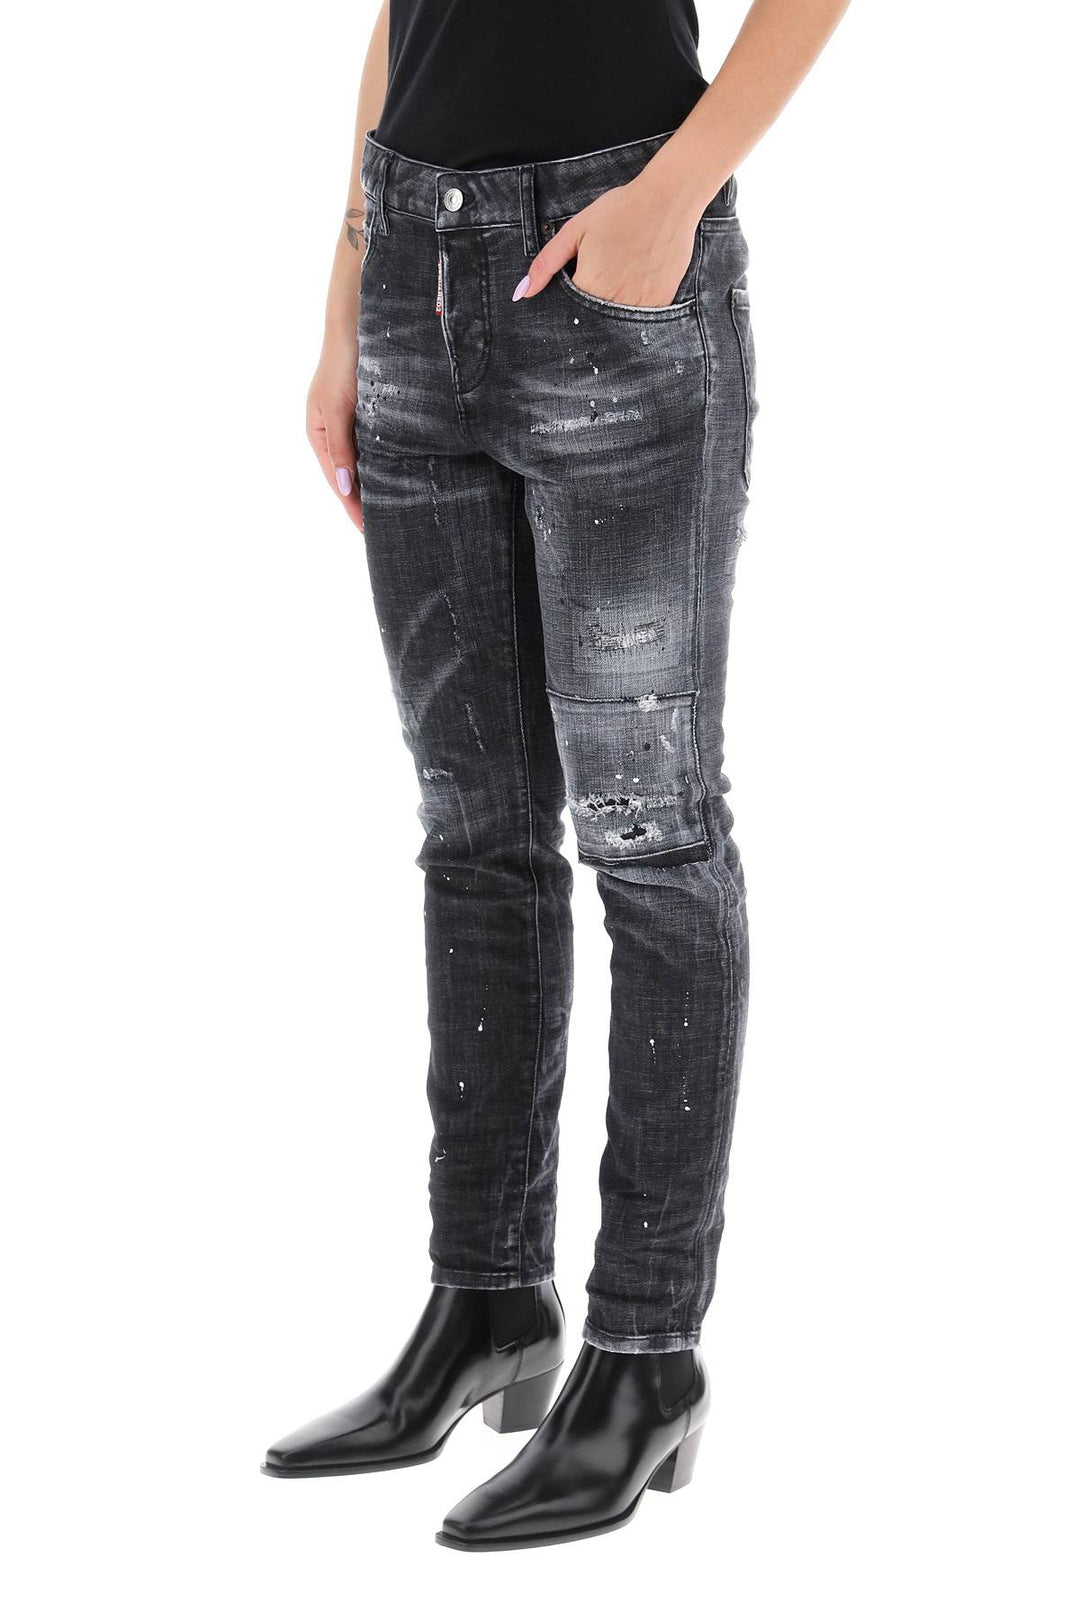 Jeans 'Cool Girl' Distressed - Dsquared2 - Donna